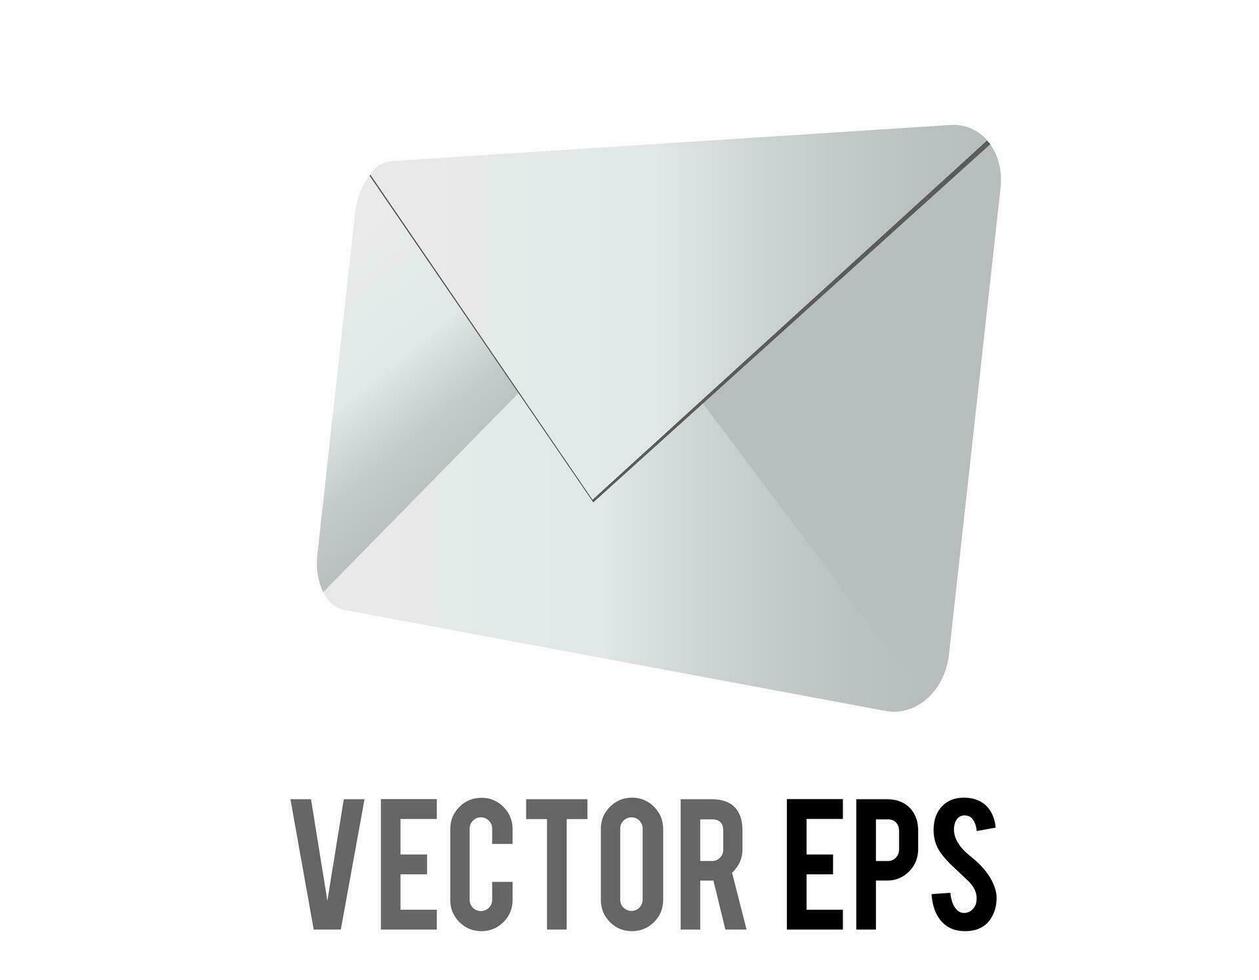 Vector back of white envelope icon, as used to send letter or card in post mail